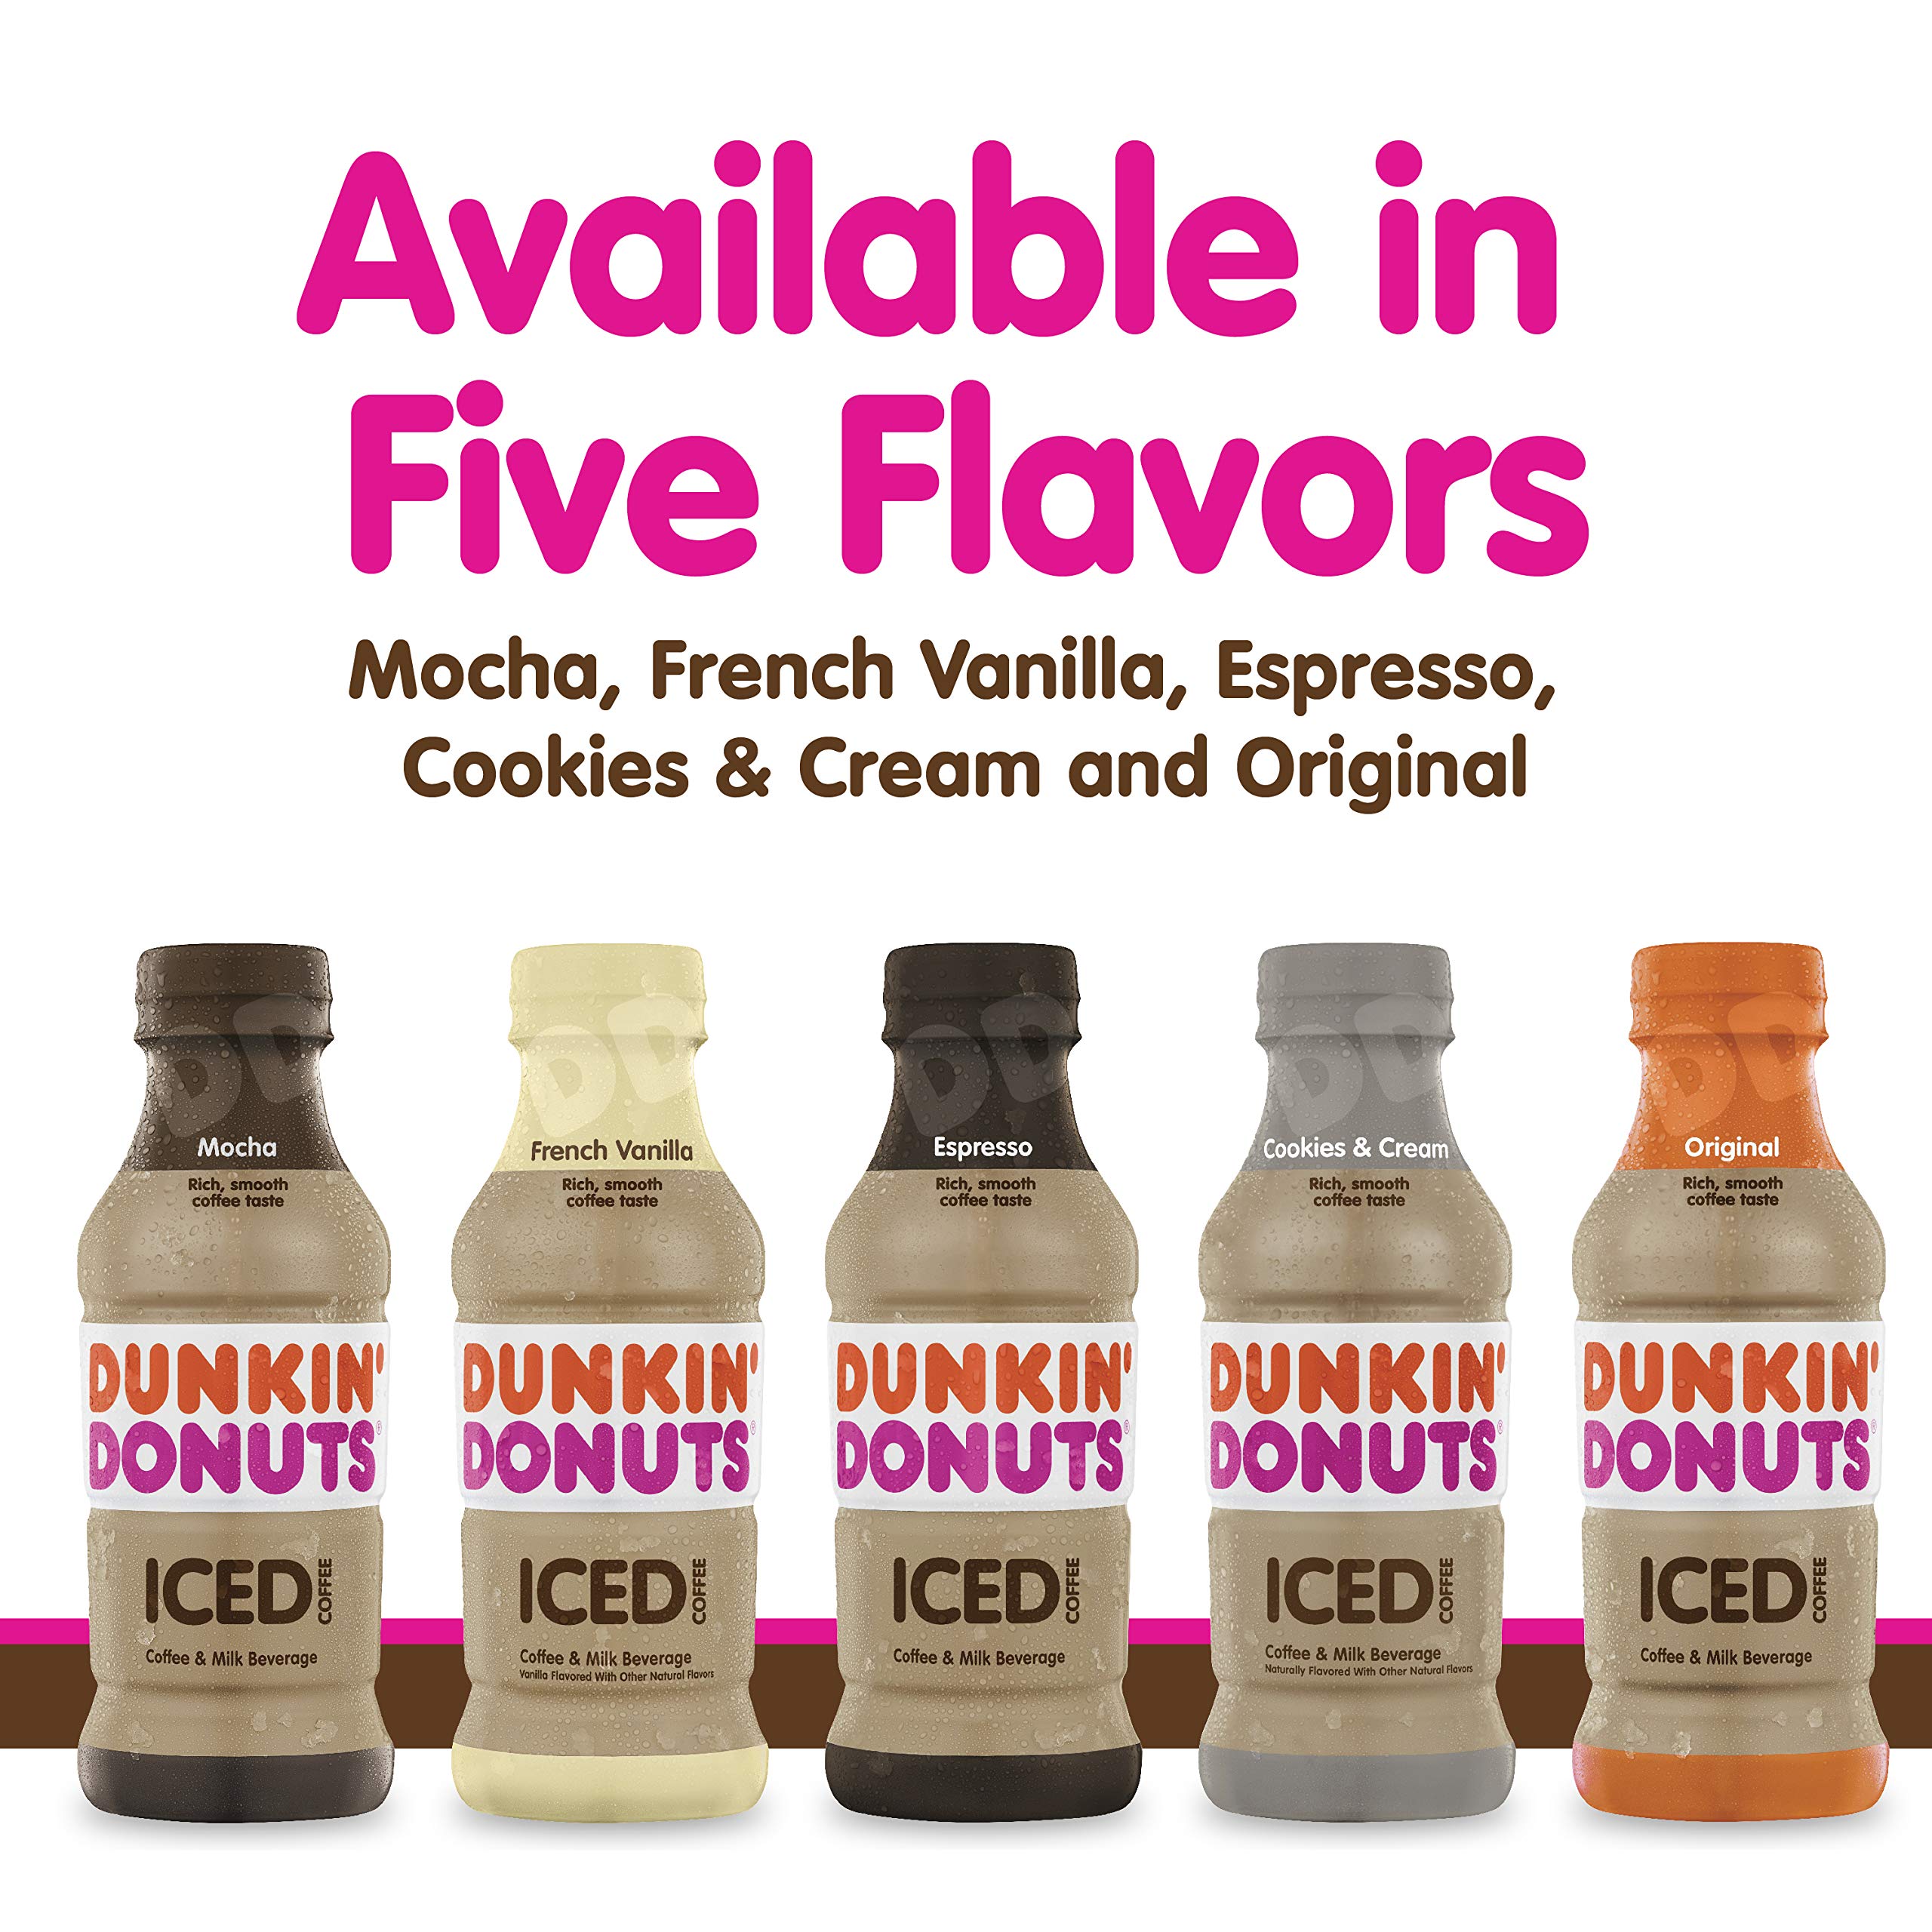 French Vanilla Iced Coffee Dunkin: A Taste of Delight